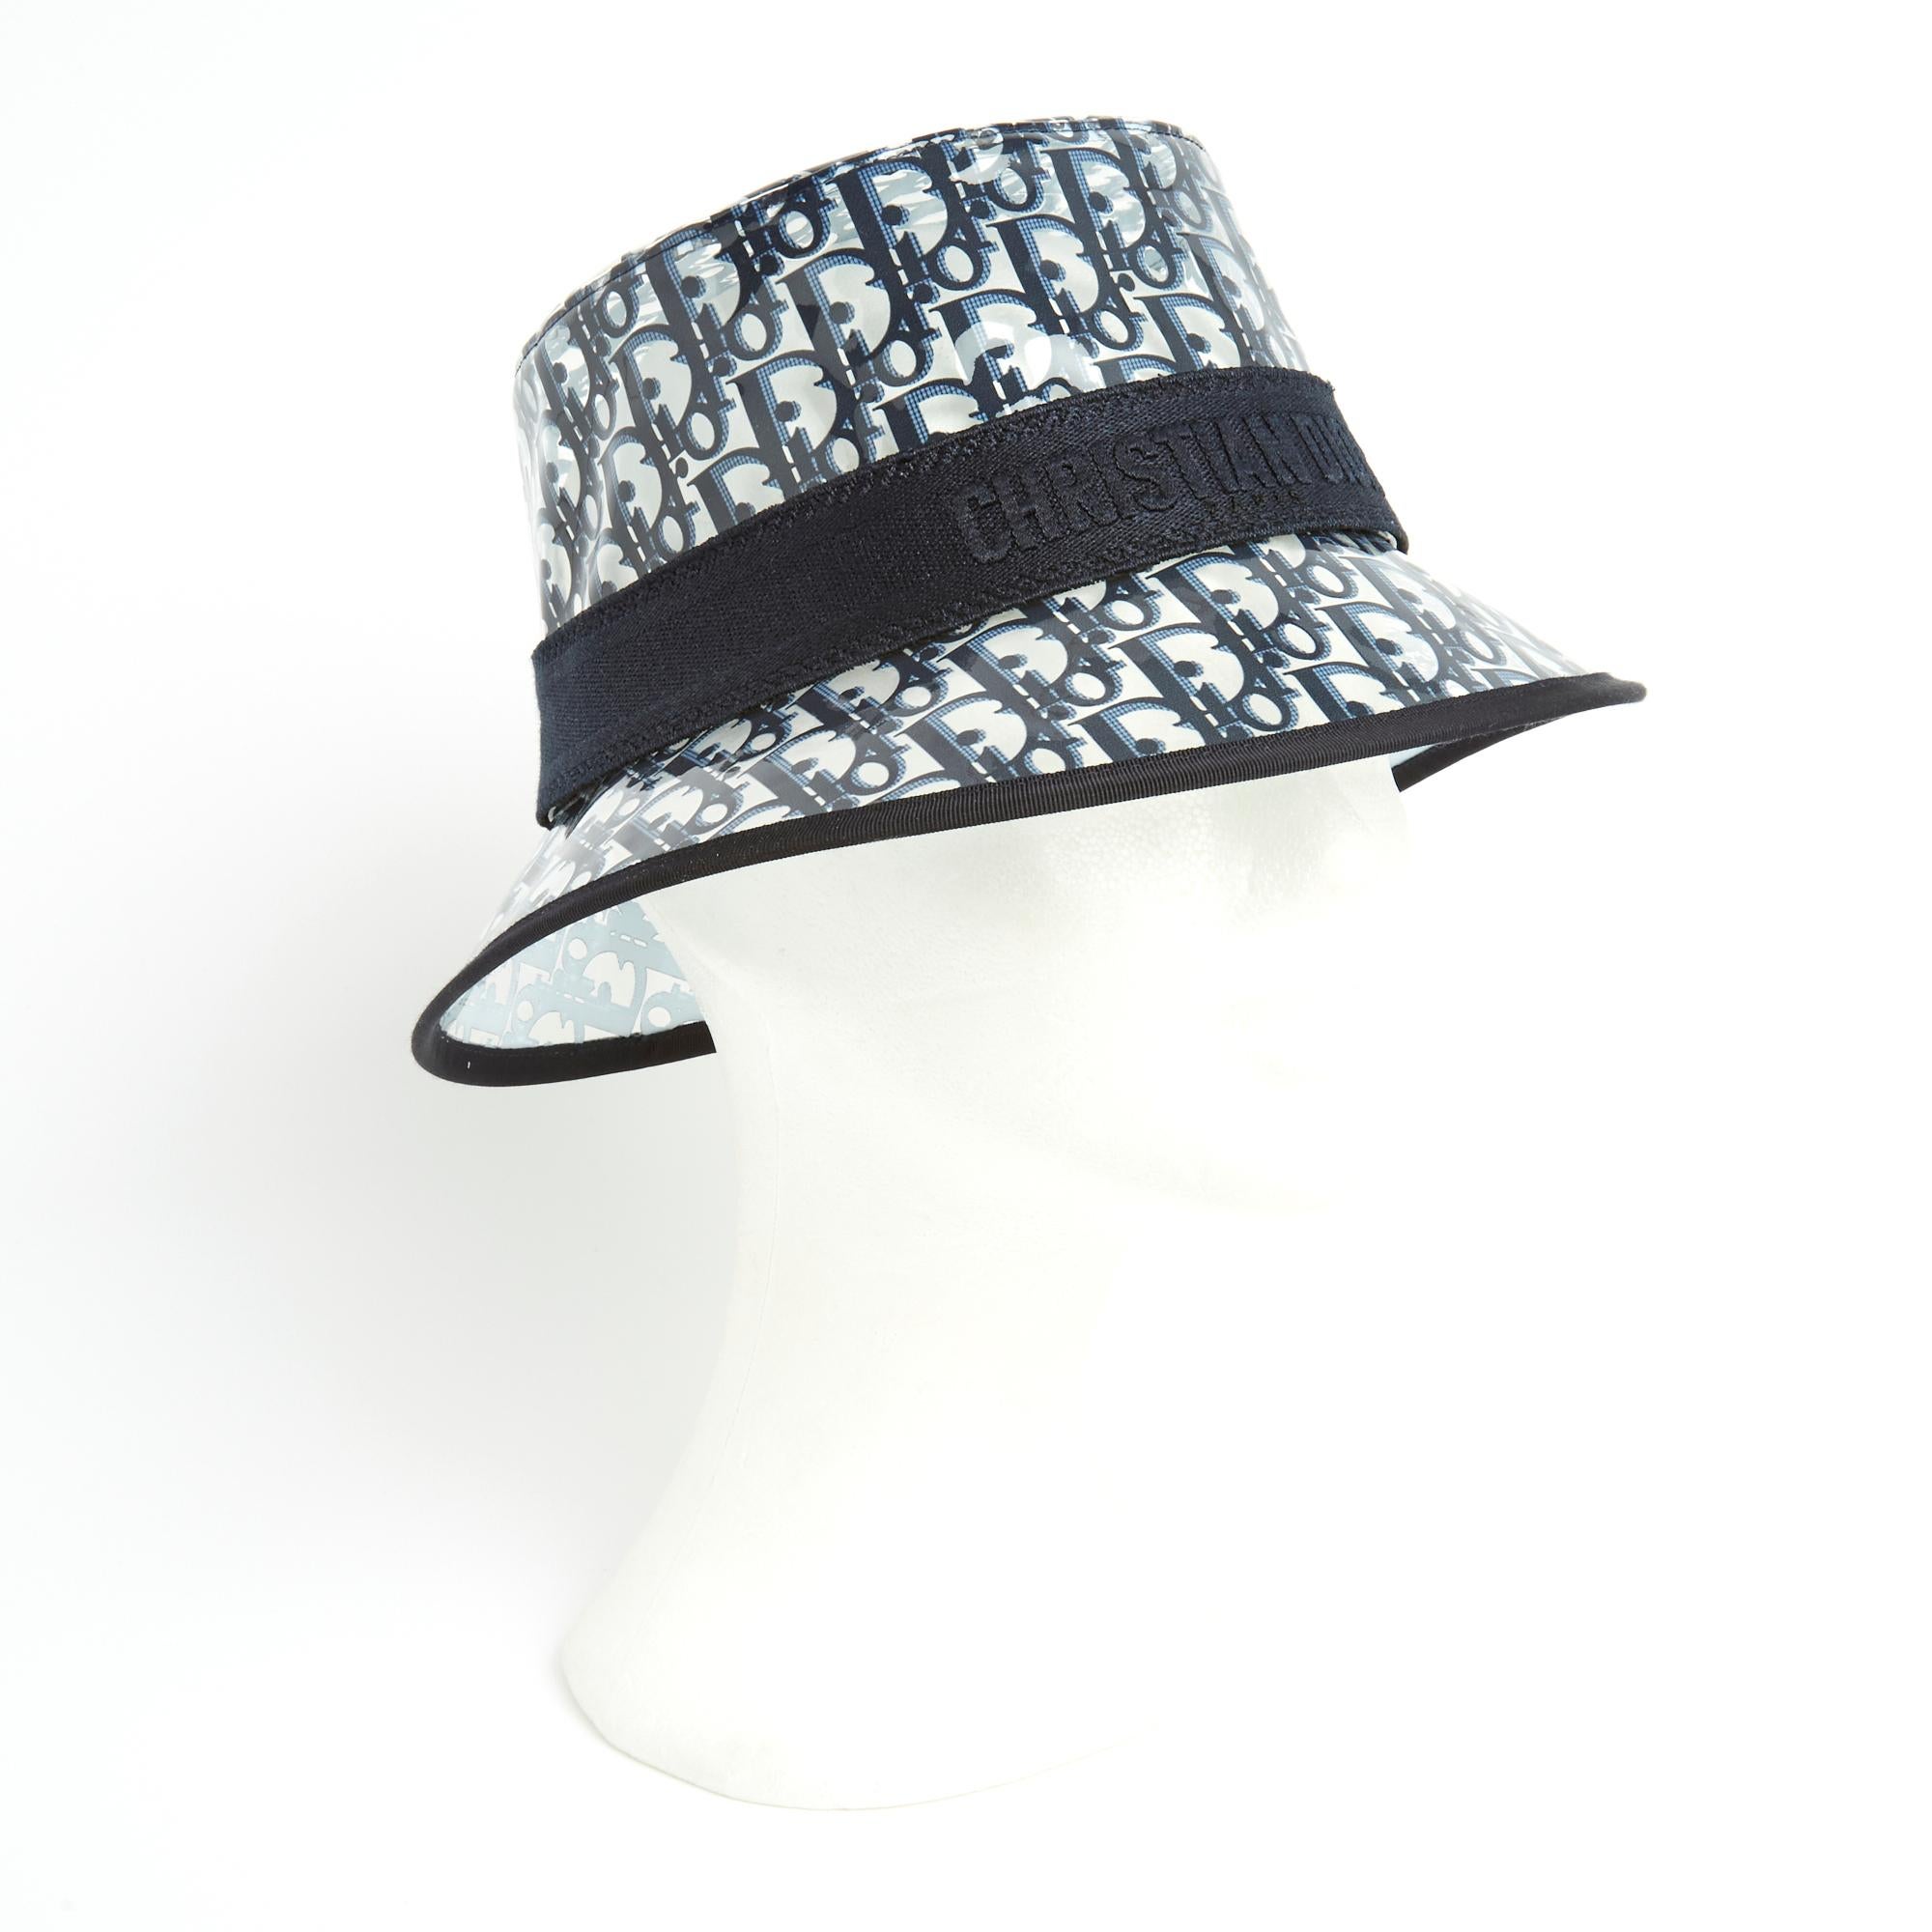 Christian Dior hat model D-Bobby French Oblique with small brim in transparent PVC printed navy blue Oblique motif, ribbon inscribed Christian Dior Paris. Size 58. The hat is probably from private sales, in perfect condition, with its original